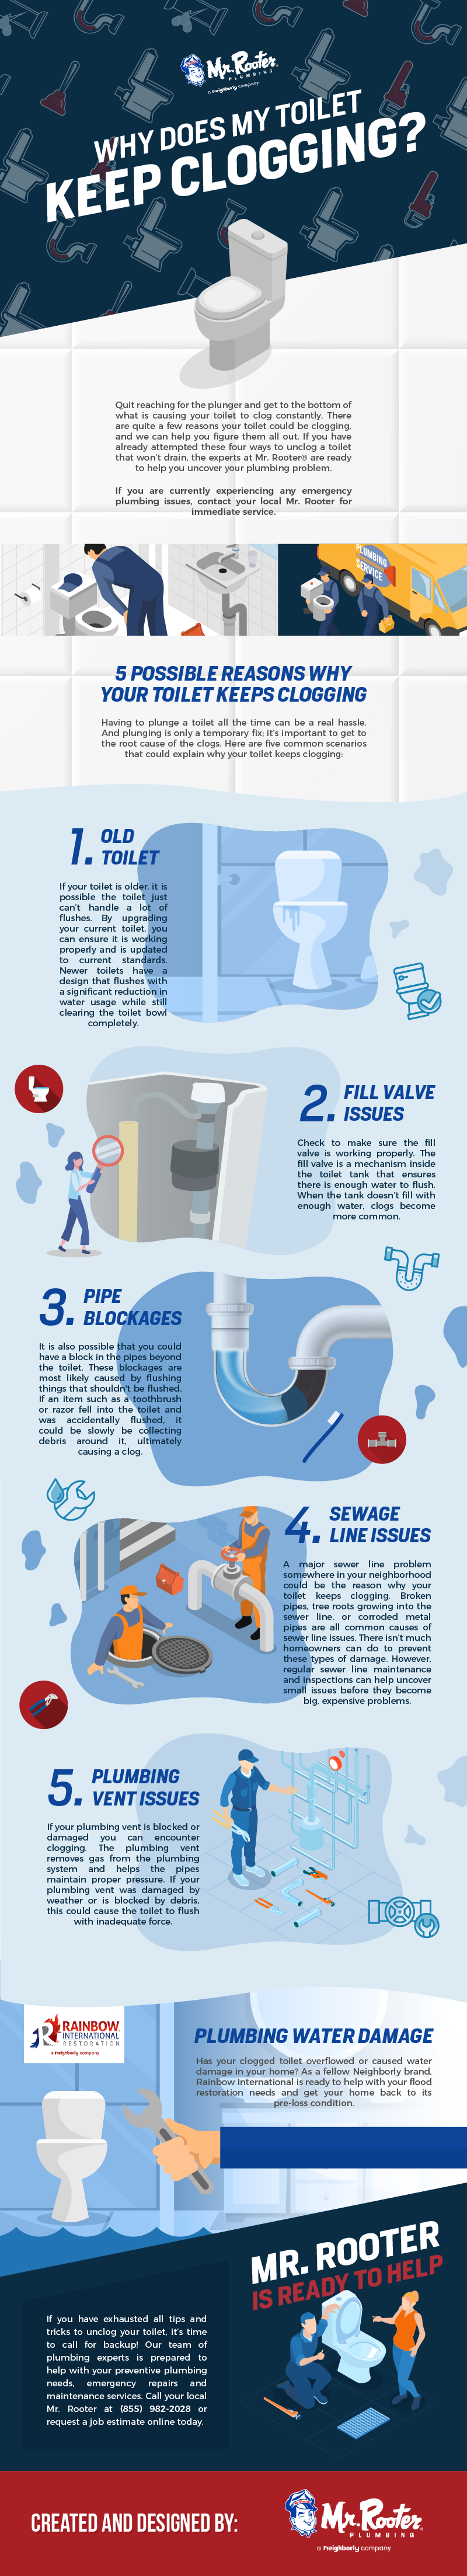 Why Does My Toilet Keep Clogging? - Infographic